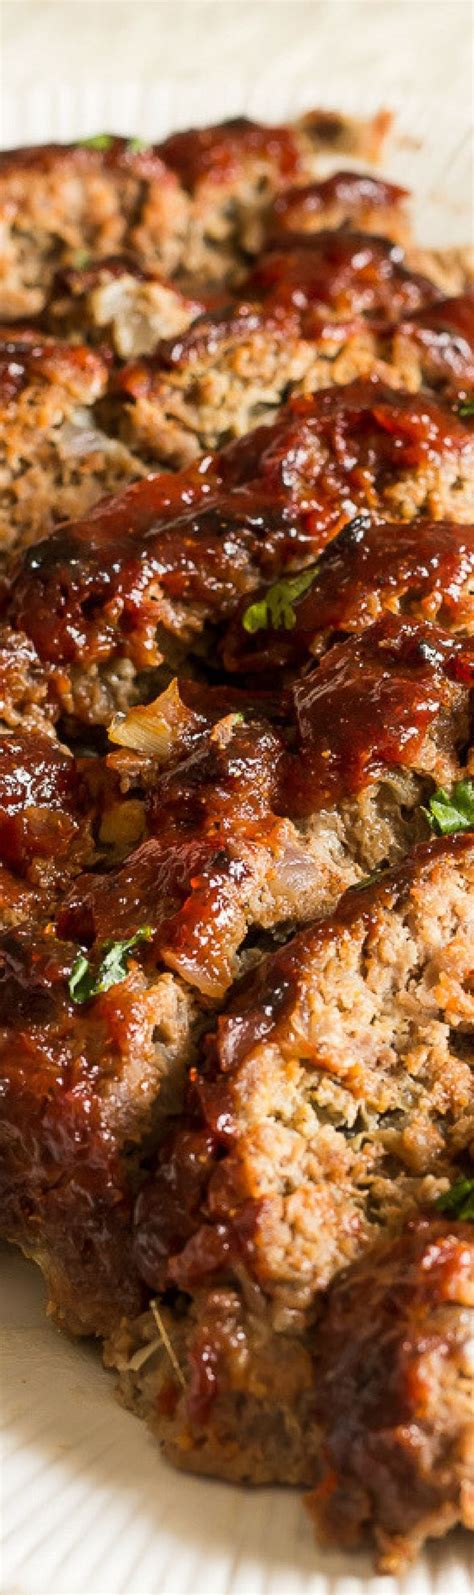 Sprinkle the bottom of the pan with brown sugar, add meatloaf and sprinkle top with brown sugar. 2Lb Meatloaf Recipie - 2 Lb Meatloaf At 375 : Simple ...